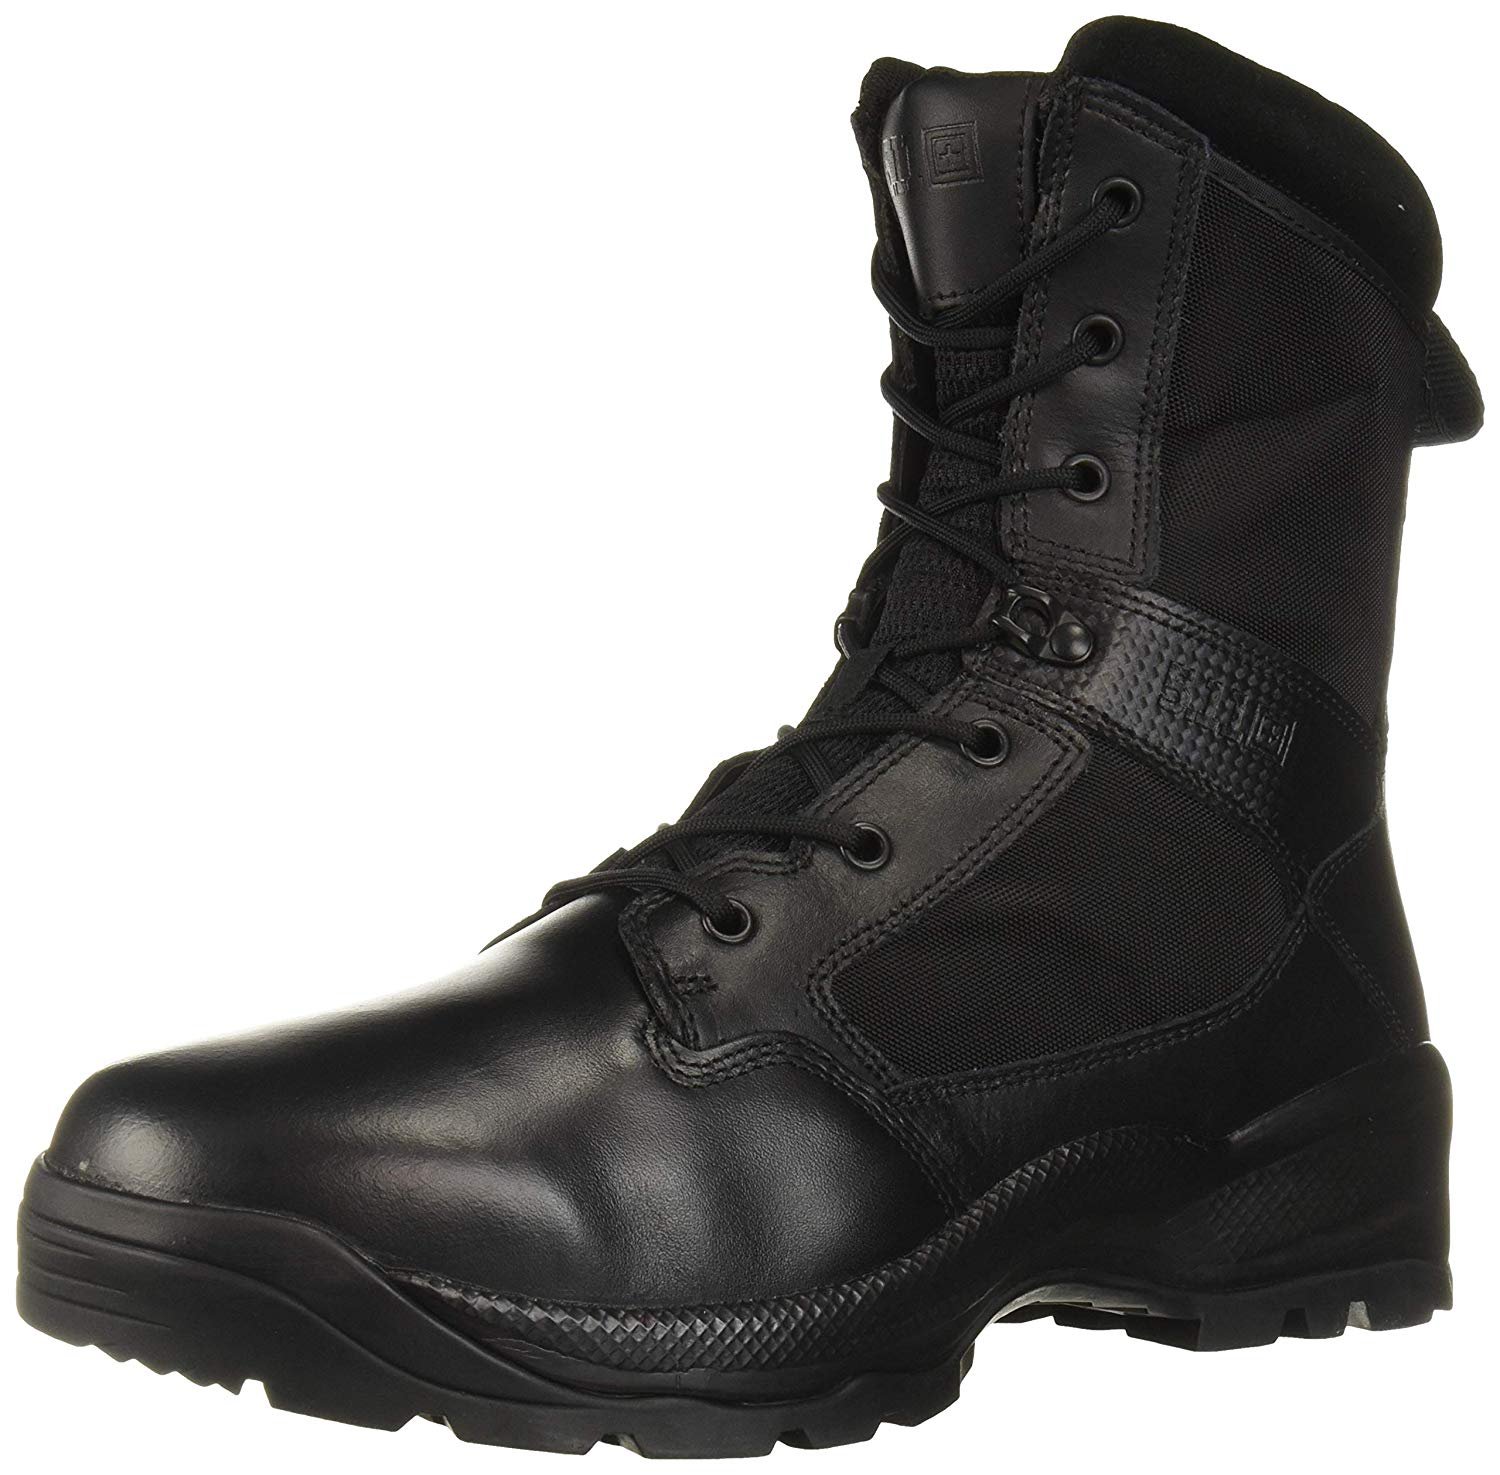 Style 12391 5.11 Tactical Mens ATAC 2.0 8 Leather Black Combat Military Side Zip Boots